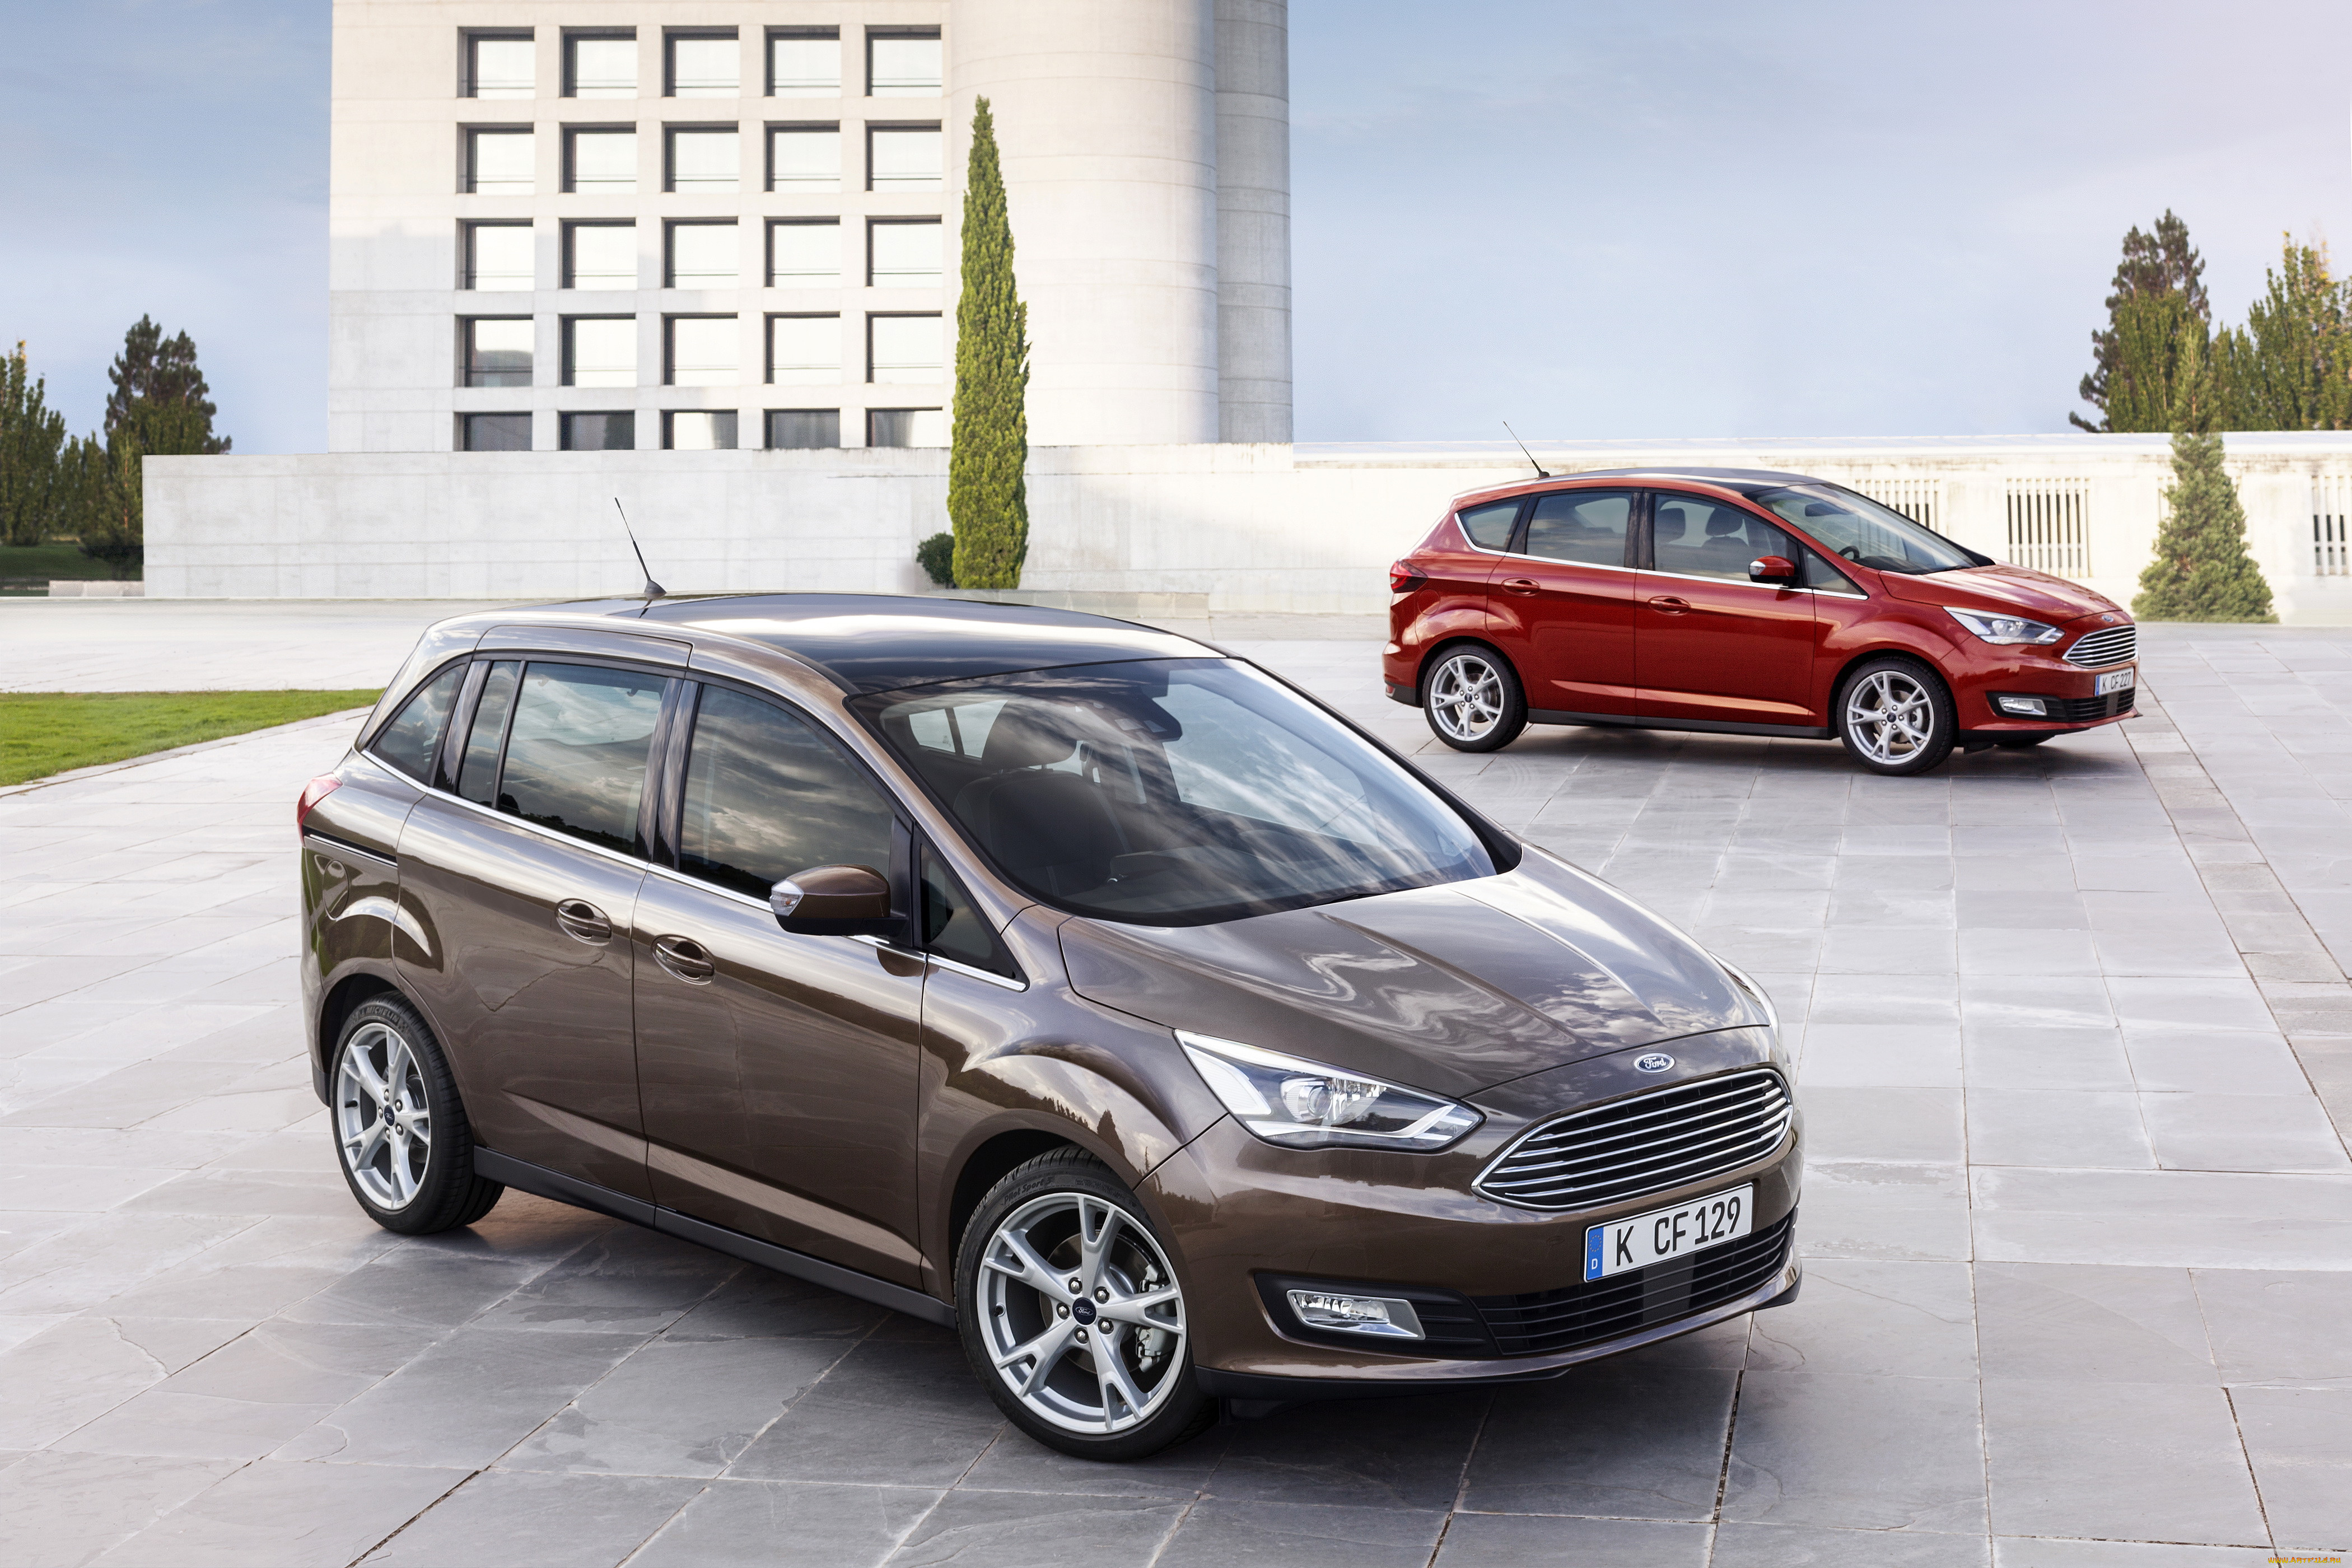 2015 ford grand c-max, , ford, , grand, , , 